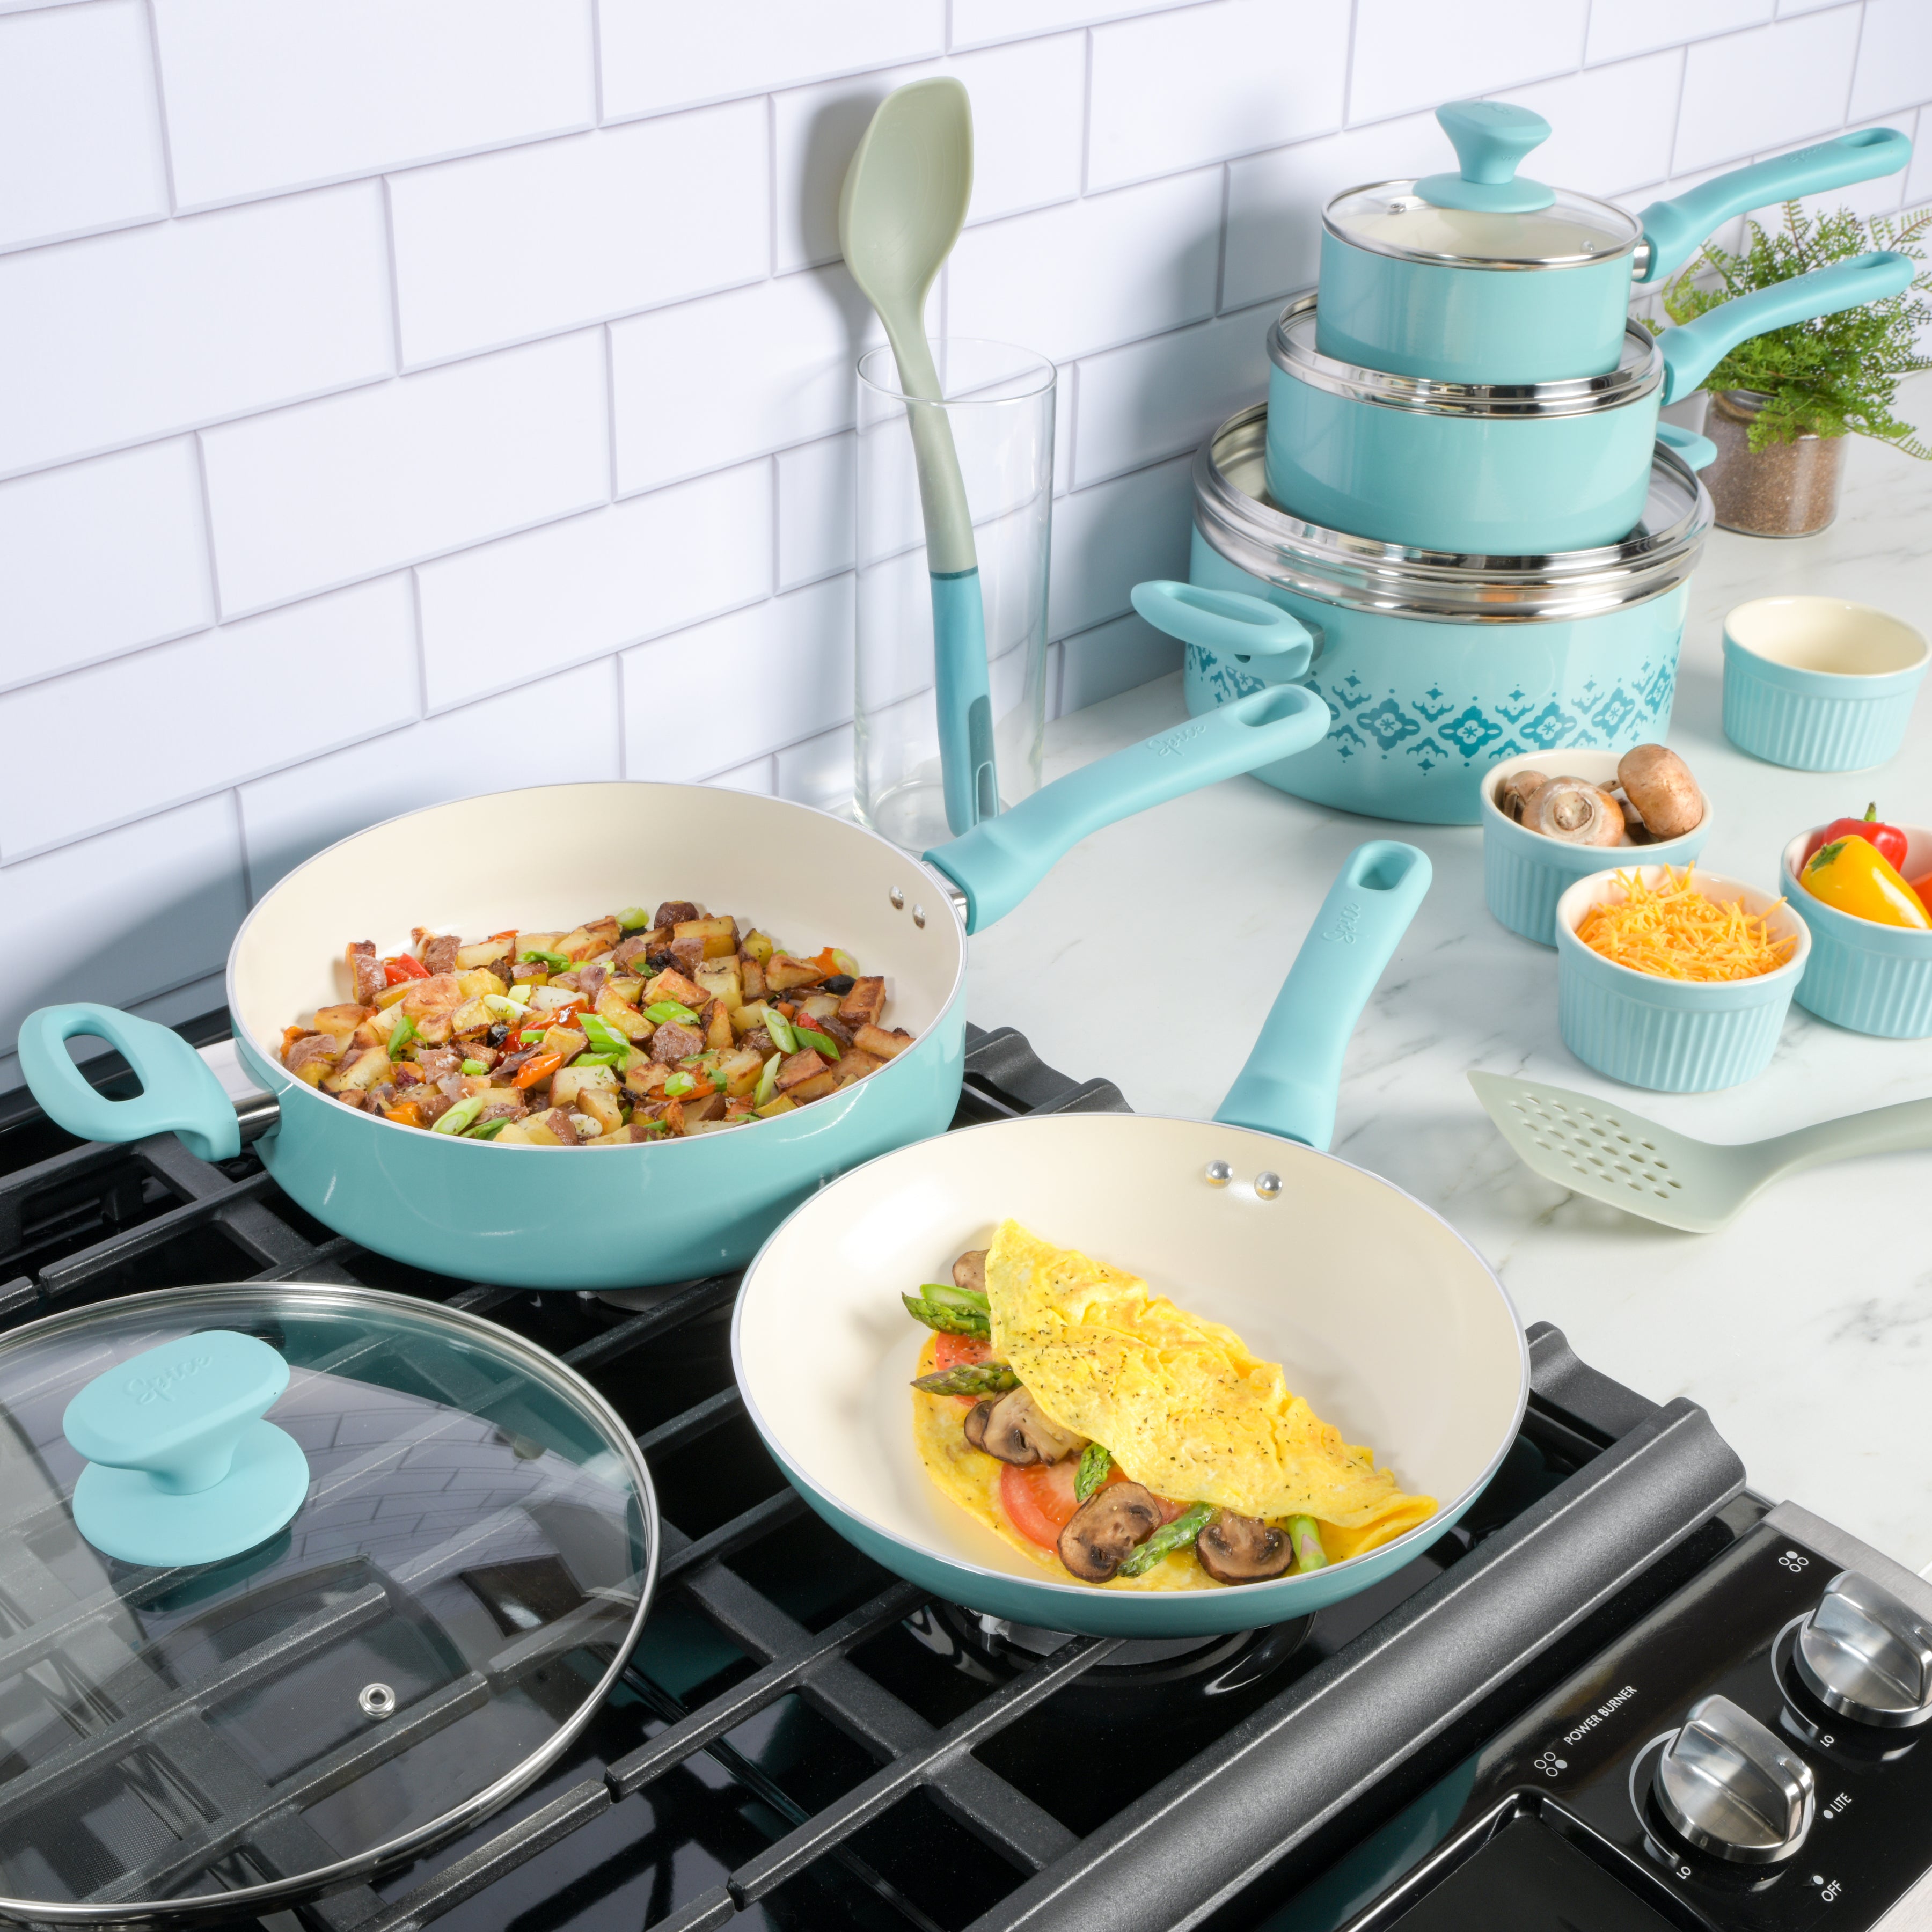 Tia Mowry's New Cookware Line Is Here